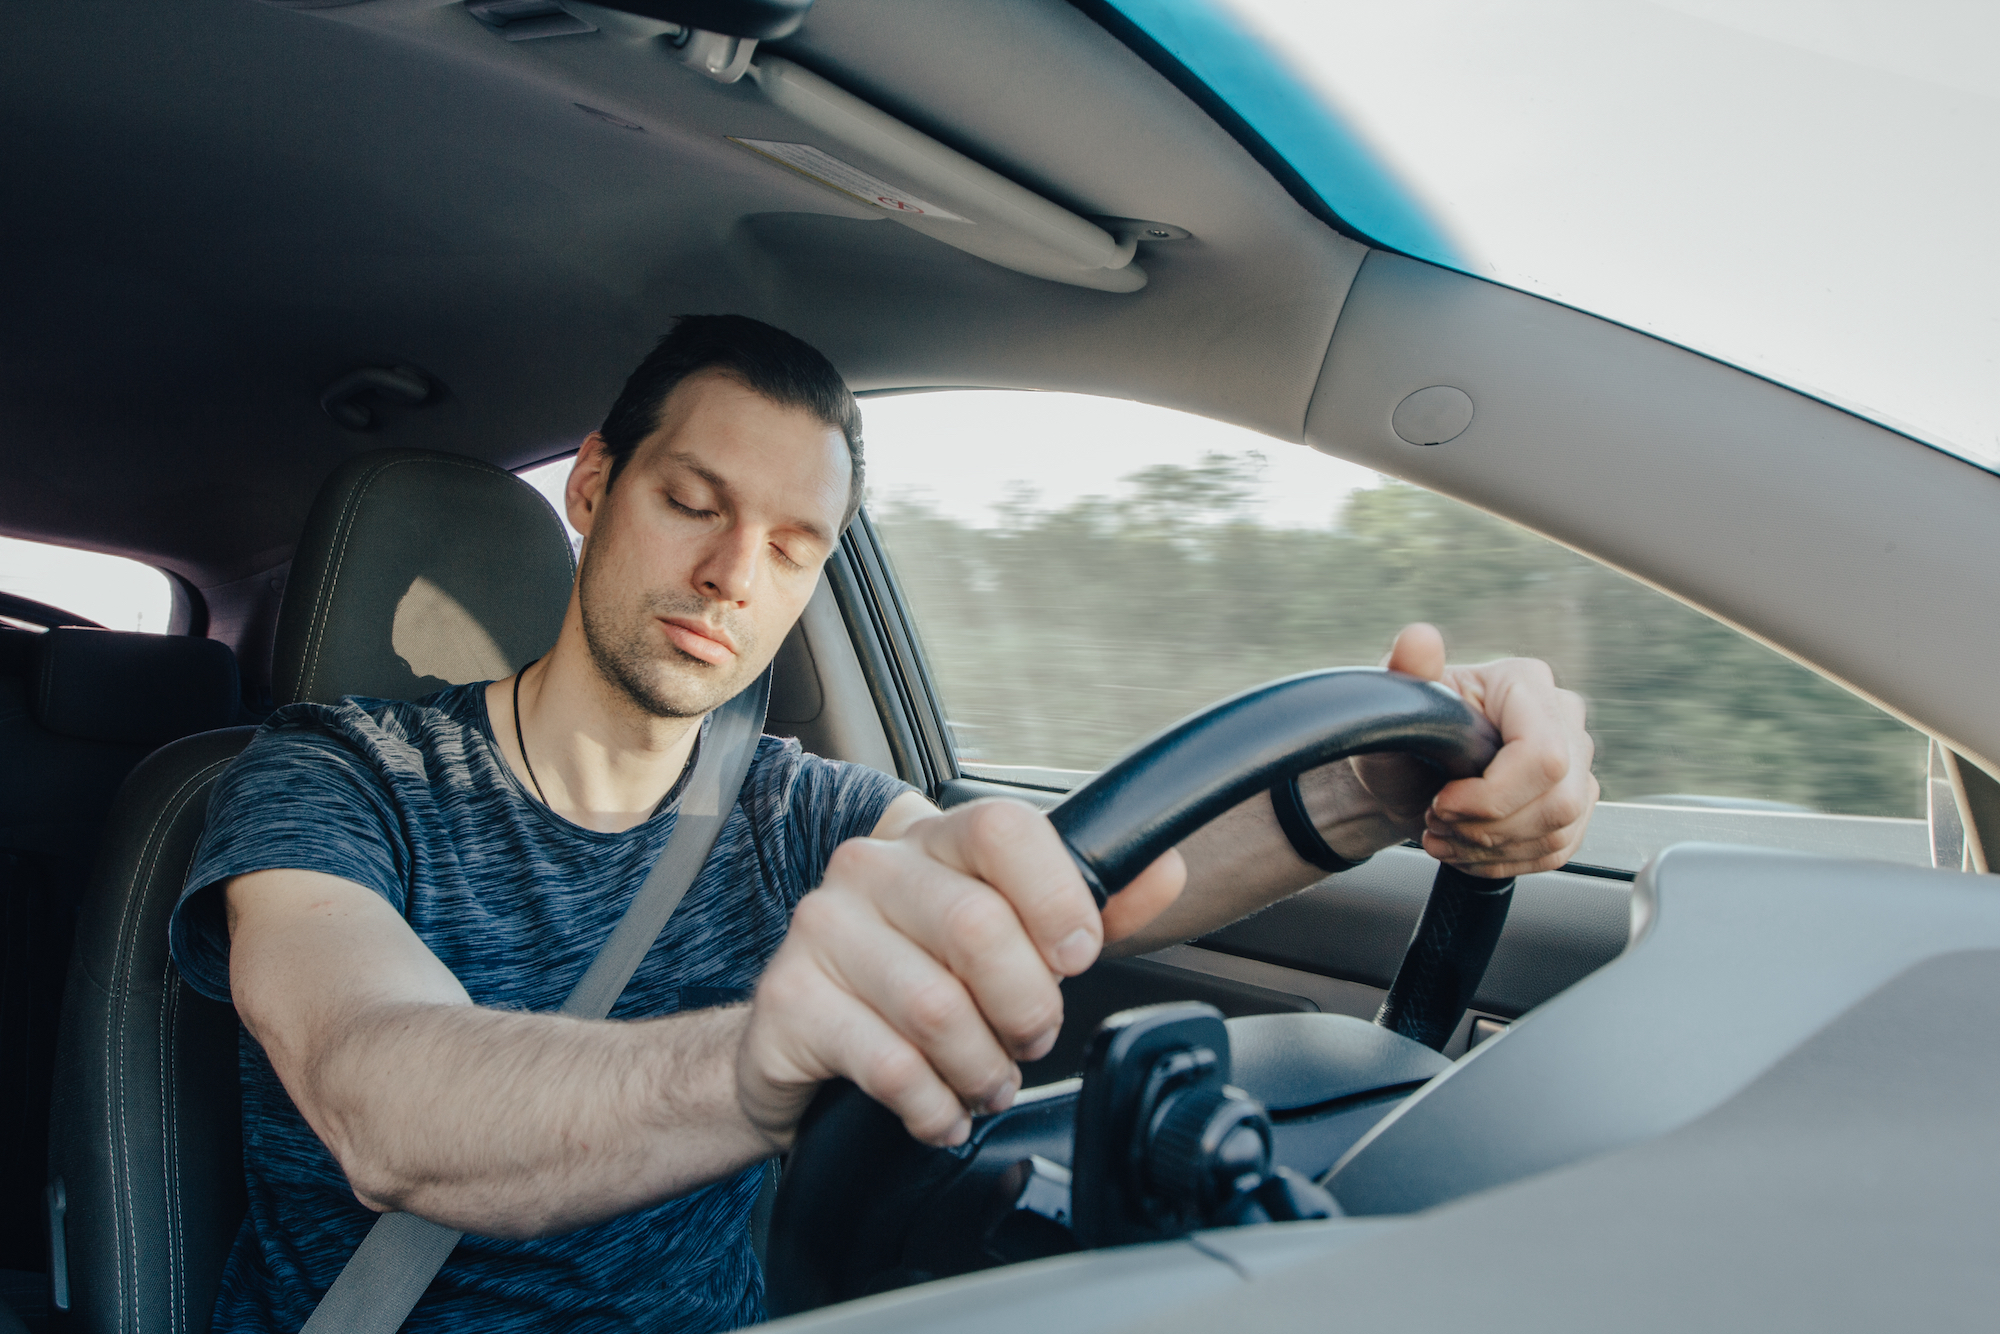 Drowsy driving is a factor in 21% of fatal crashes